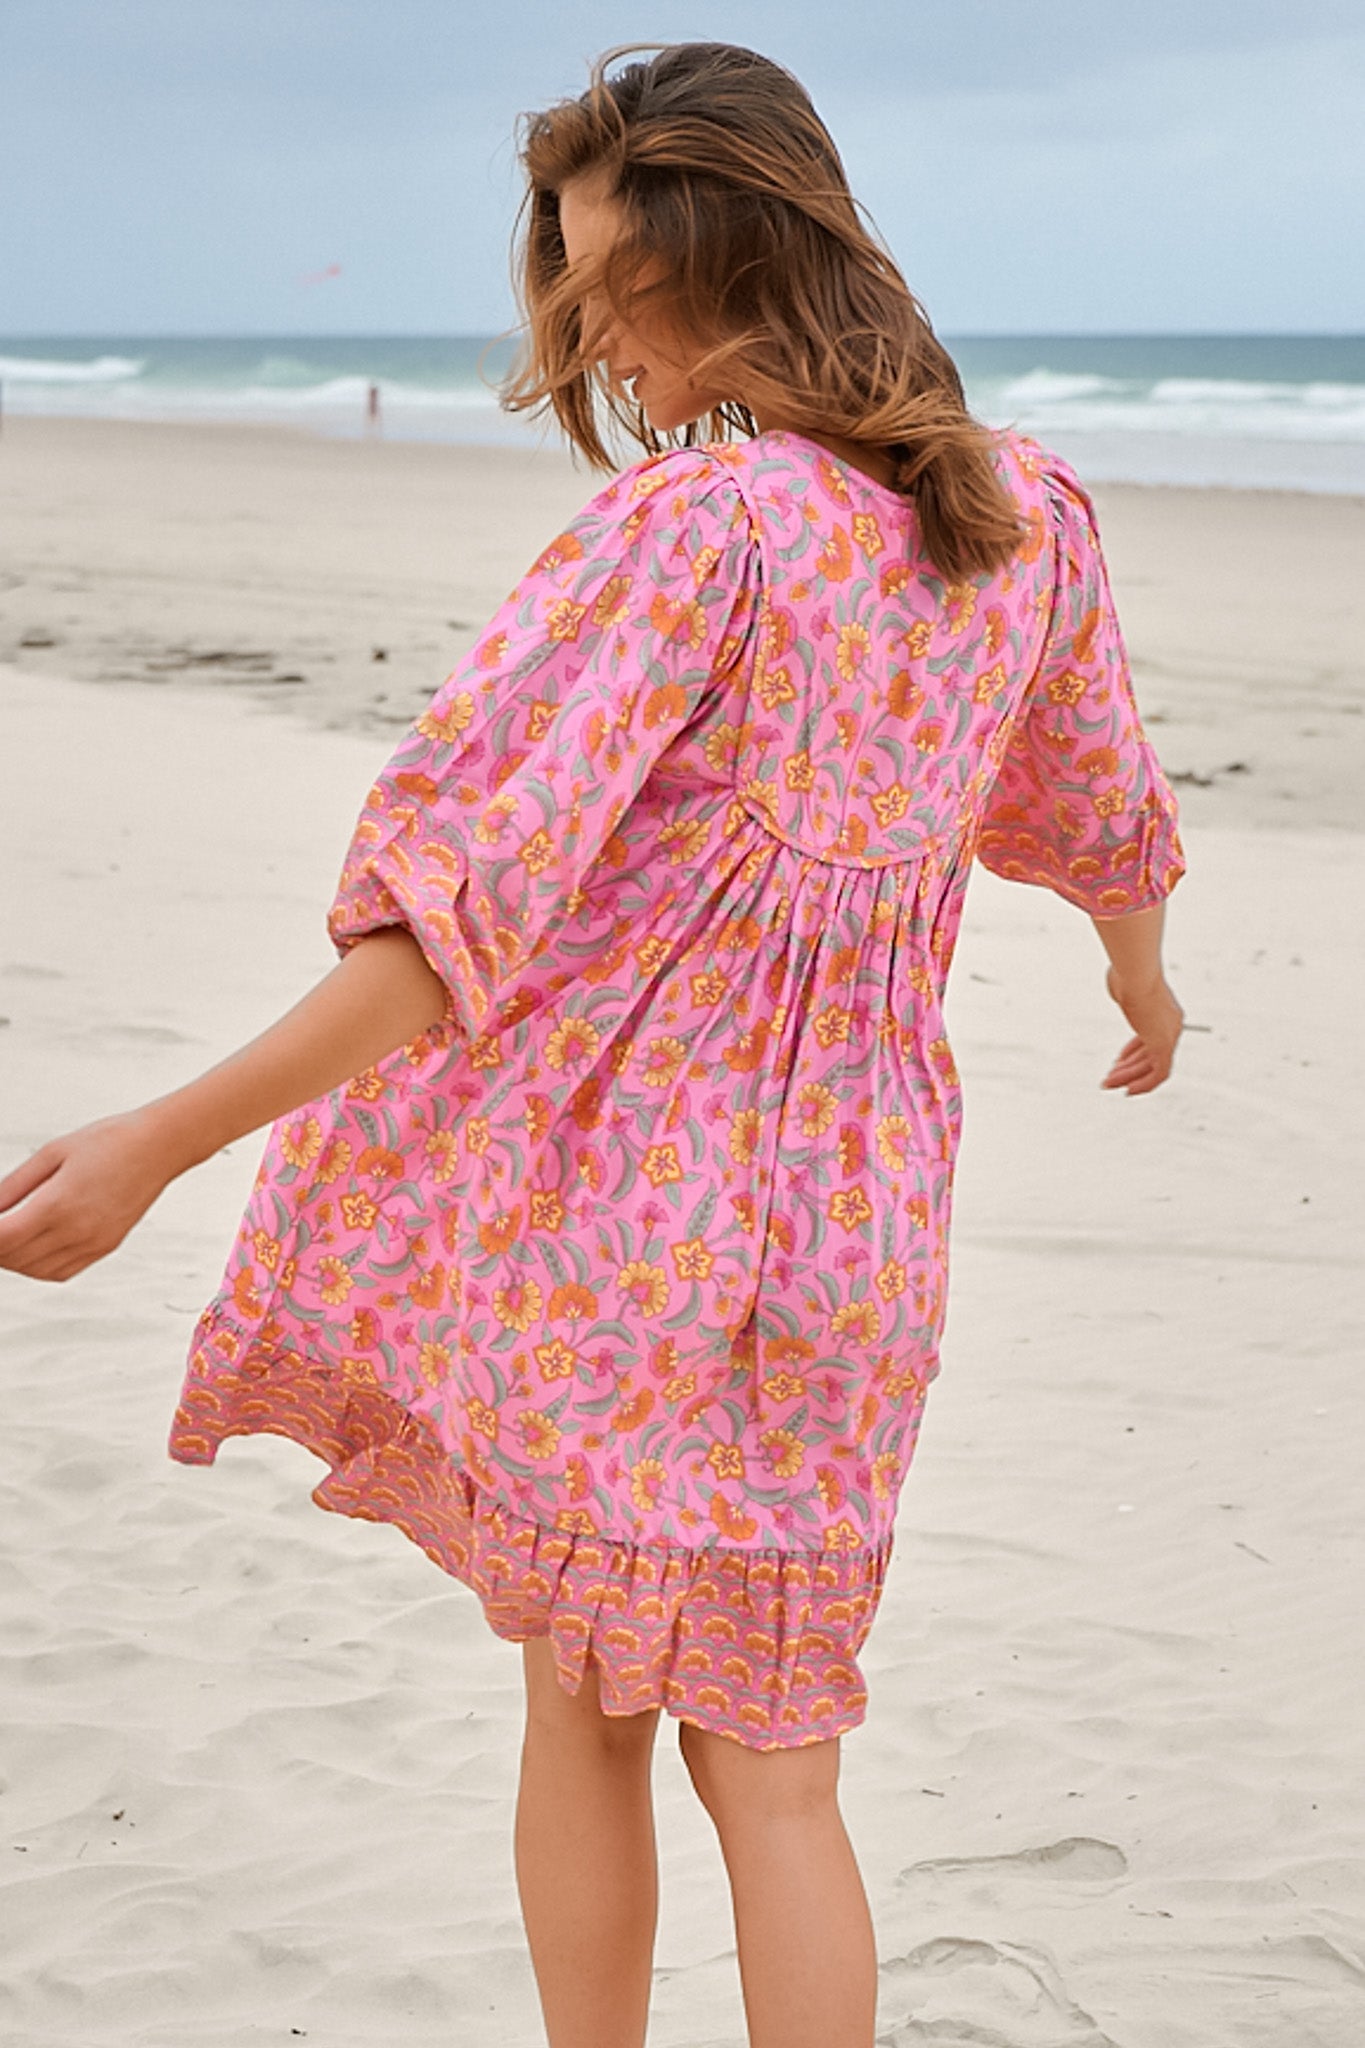 JAASE - French Mini Dress: Yoke Neckline Dress with Matching Belt in Rosewater Print